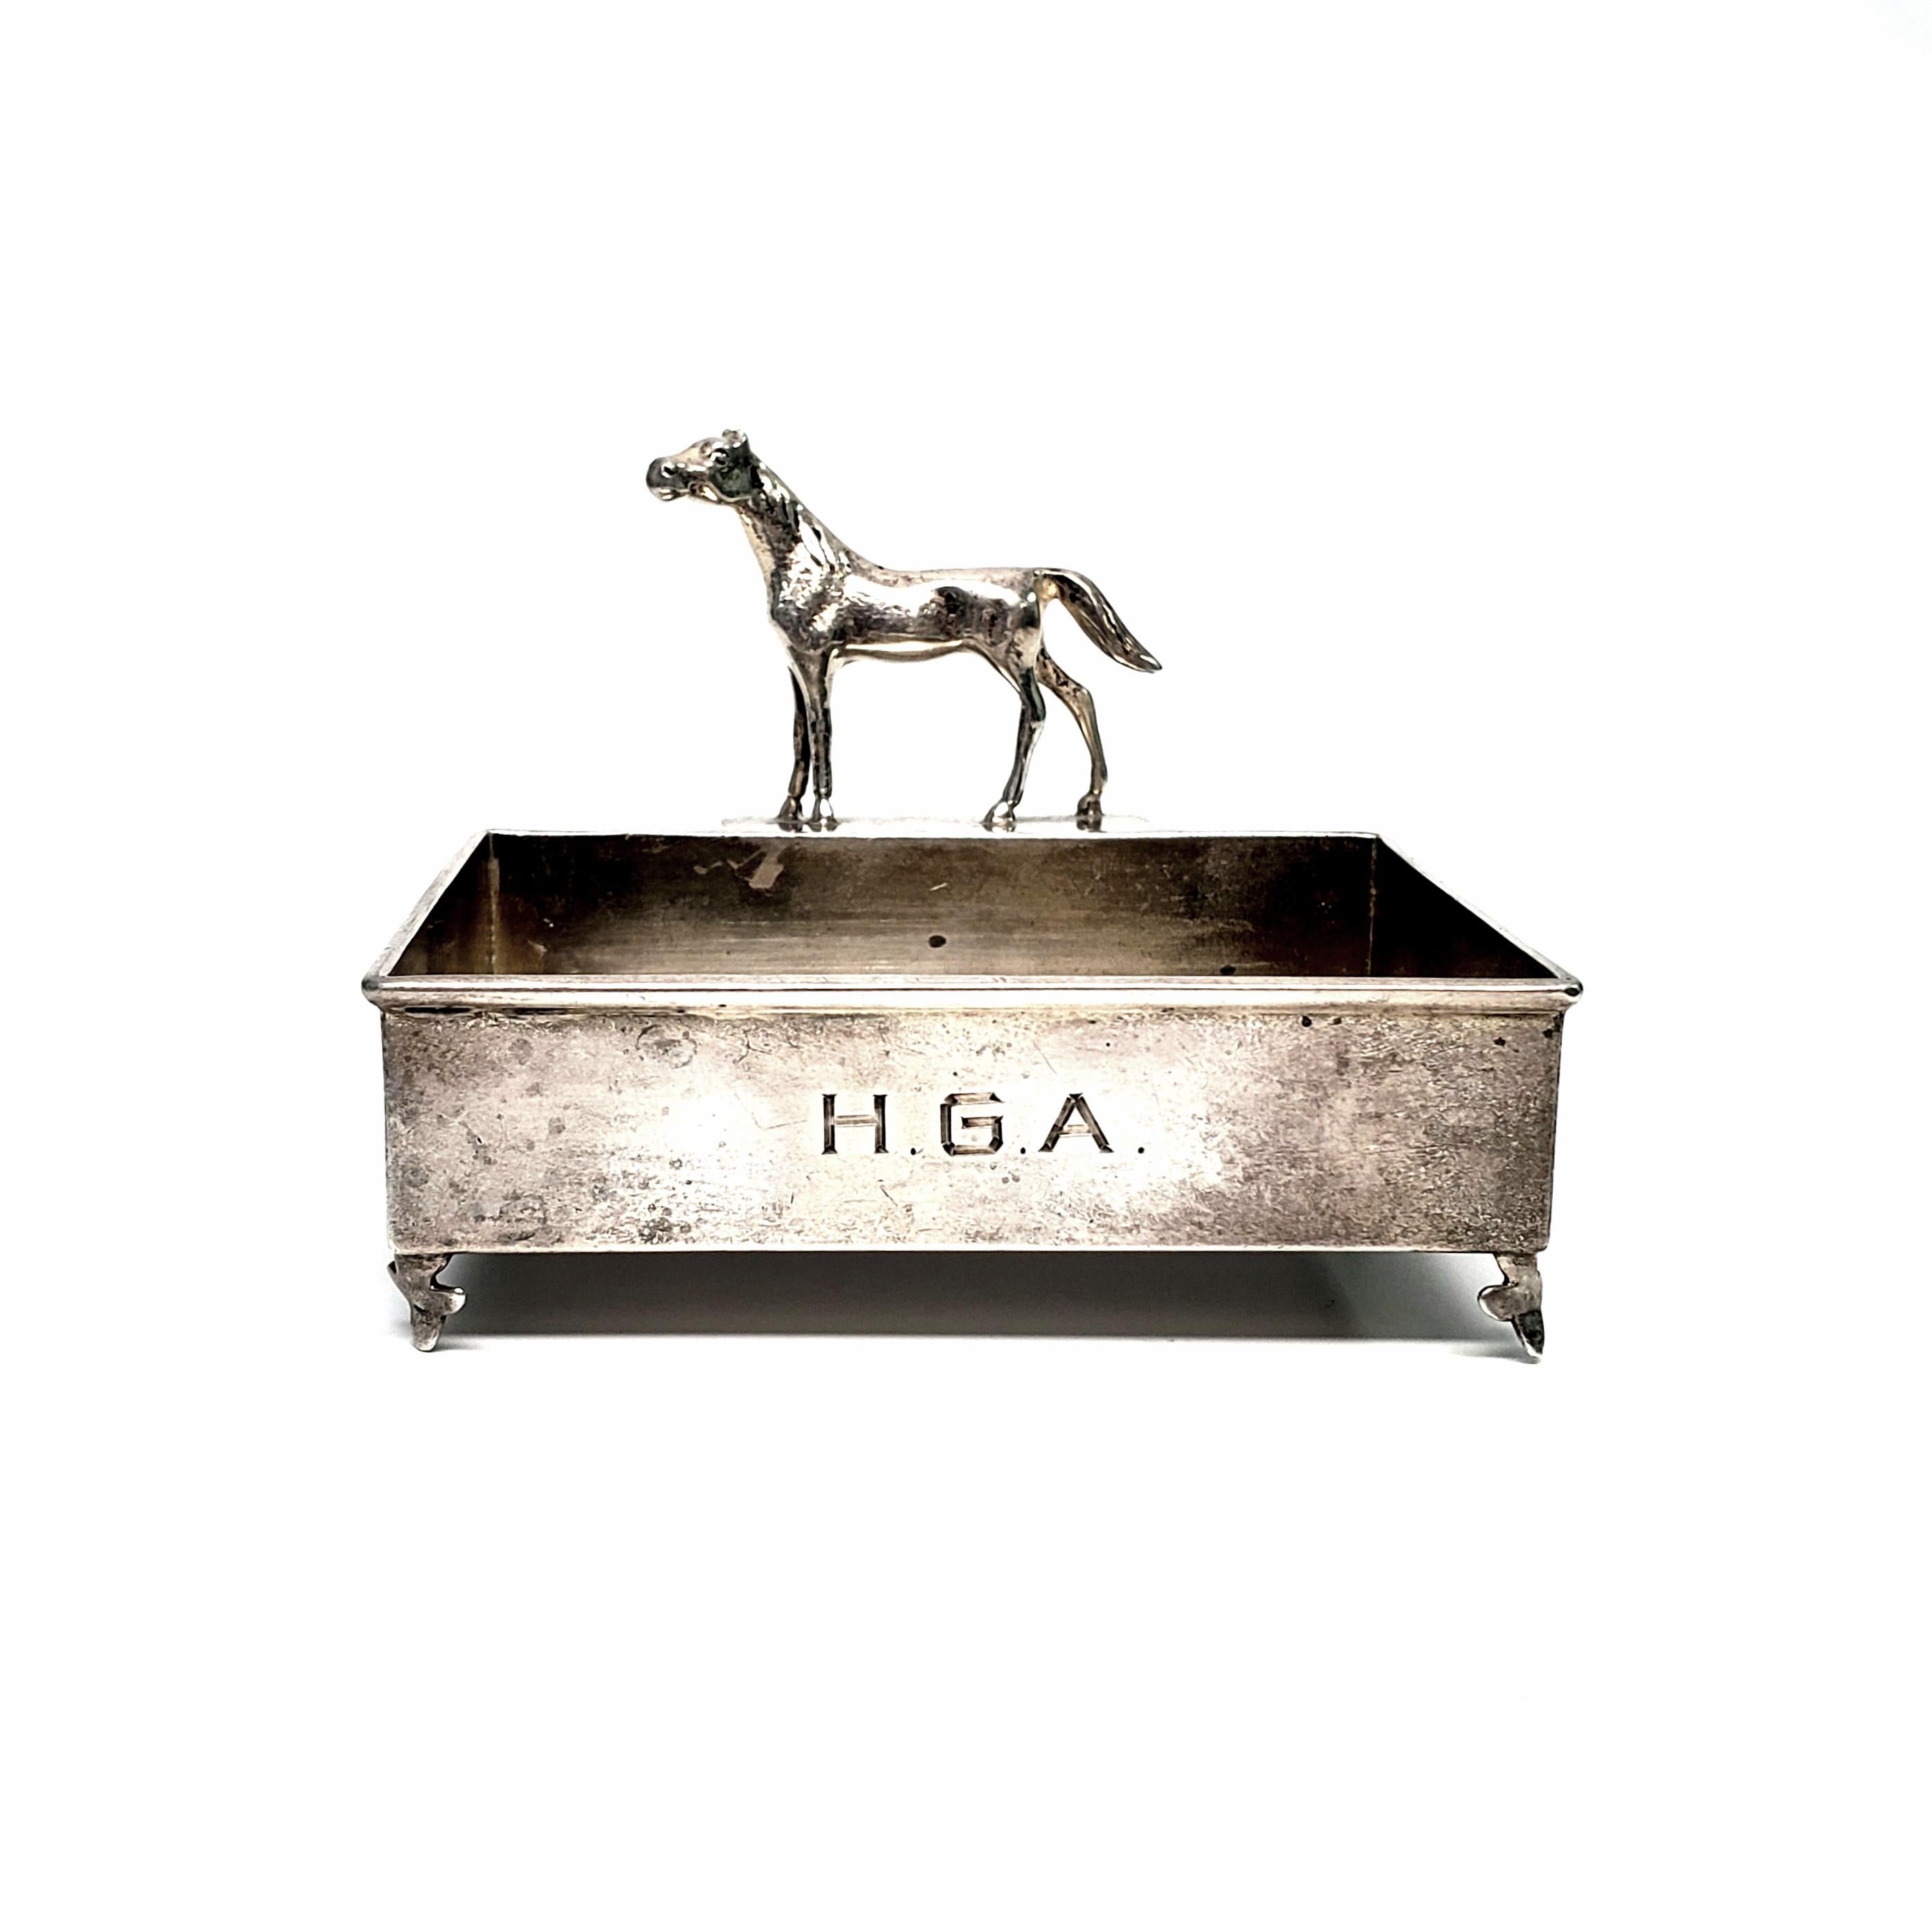 Vintage sterling silver business card holder by Herbst & Wassall.

Featuring a figural horse, this footed business card holder was designed by Herbst & Wassall, 1909-1940. Most likely sold at Gorham's sales office, was opened in 1905 on NYC's 5th